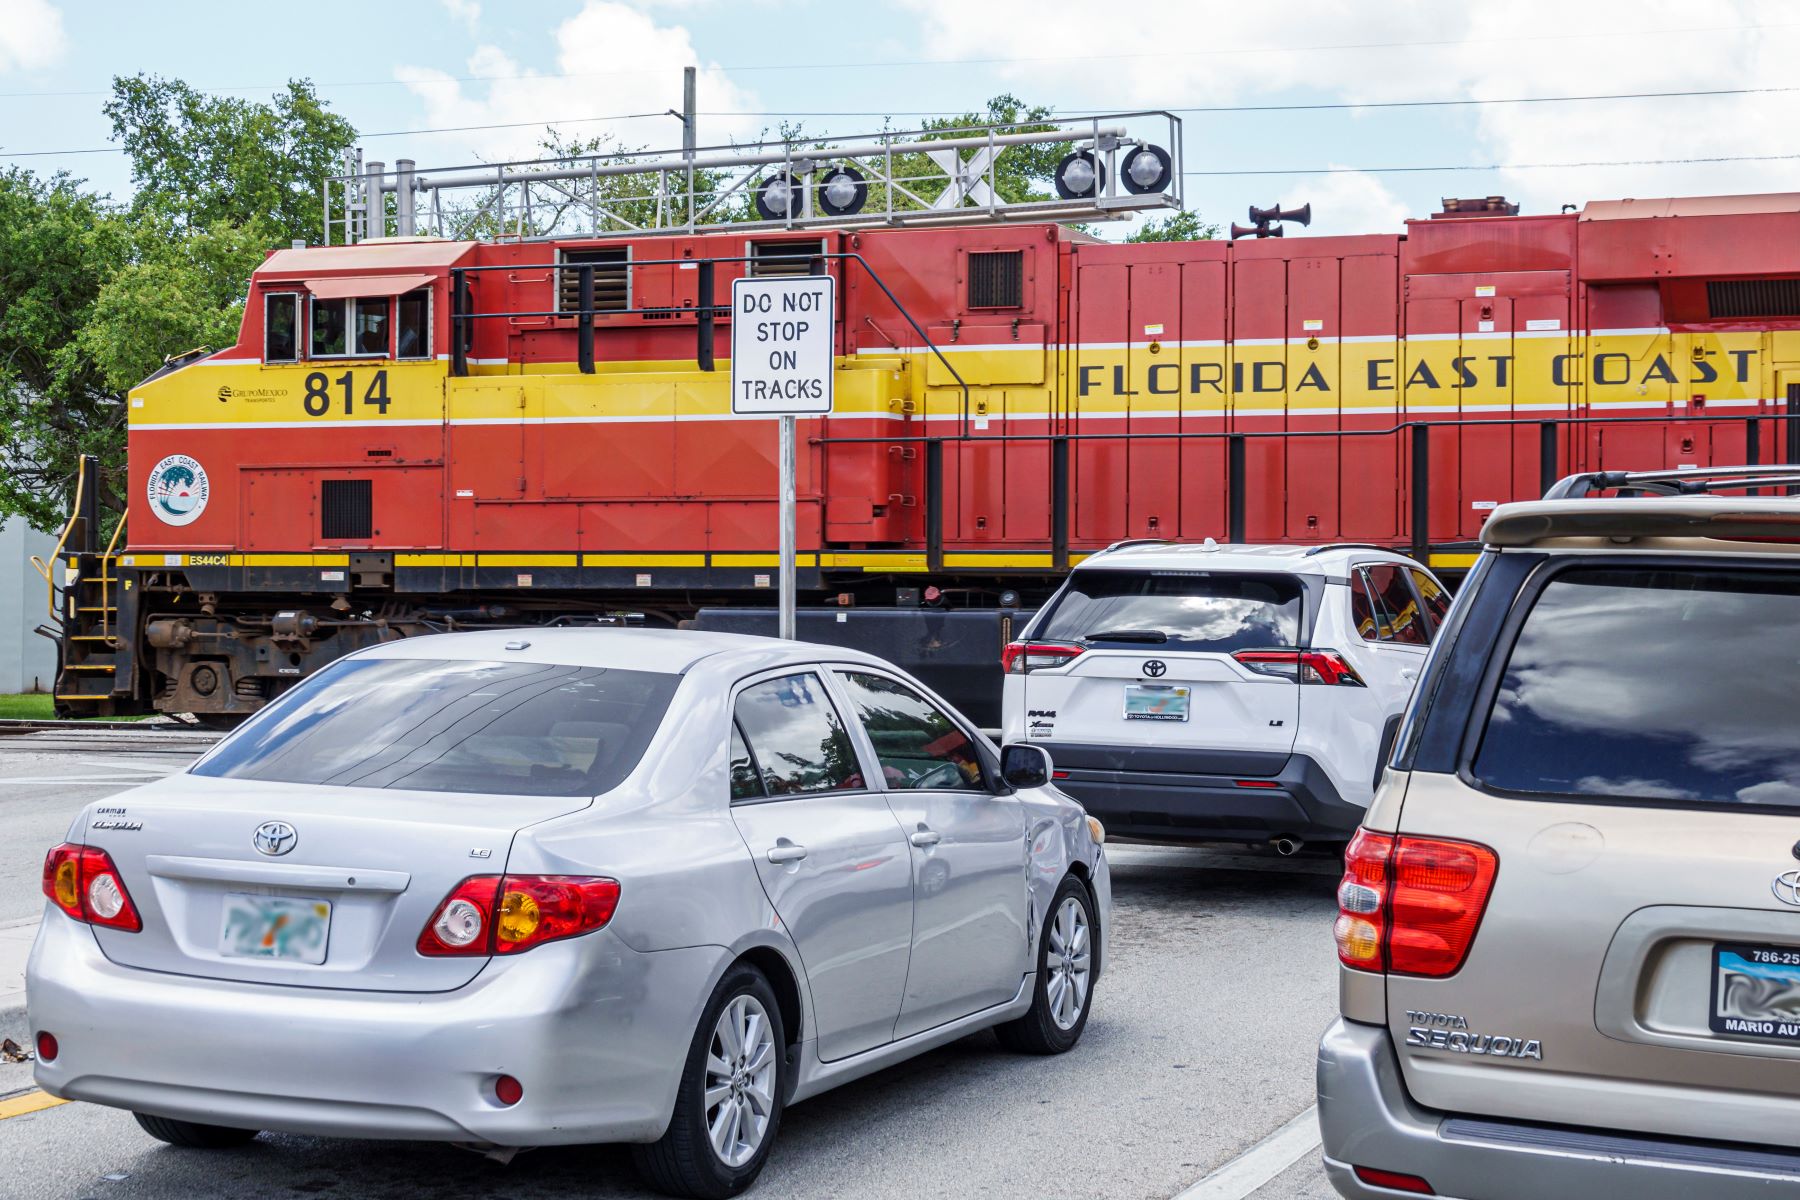 A common car superstition involves crossing over train tracks